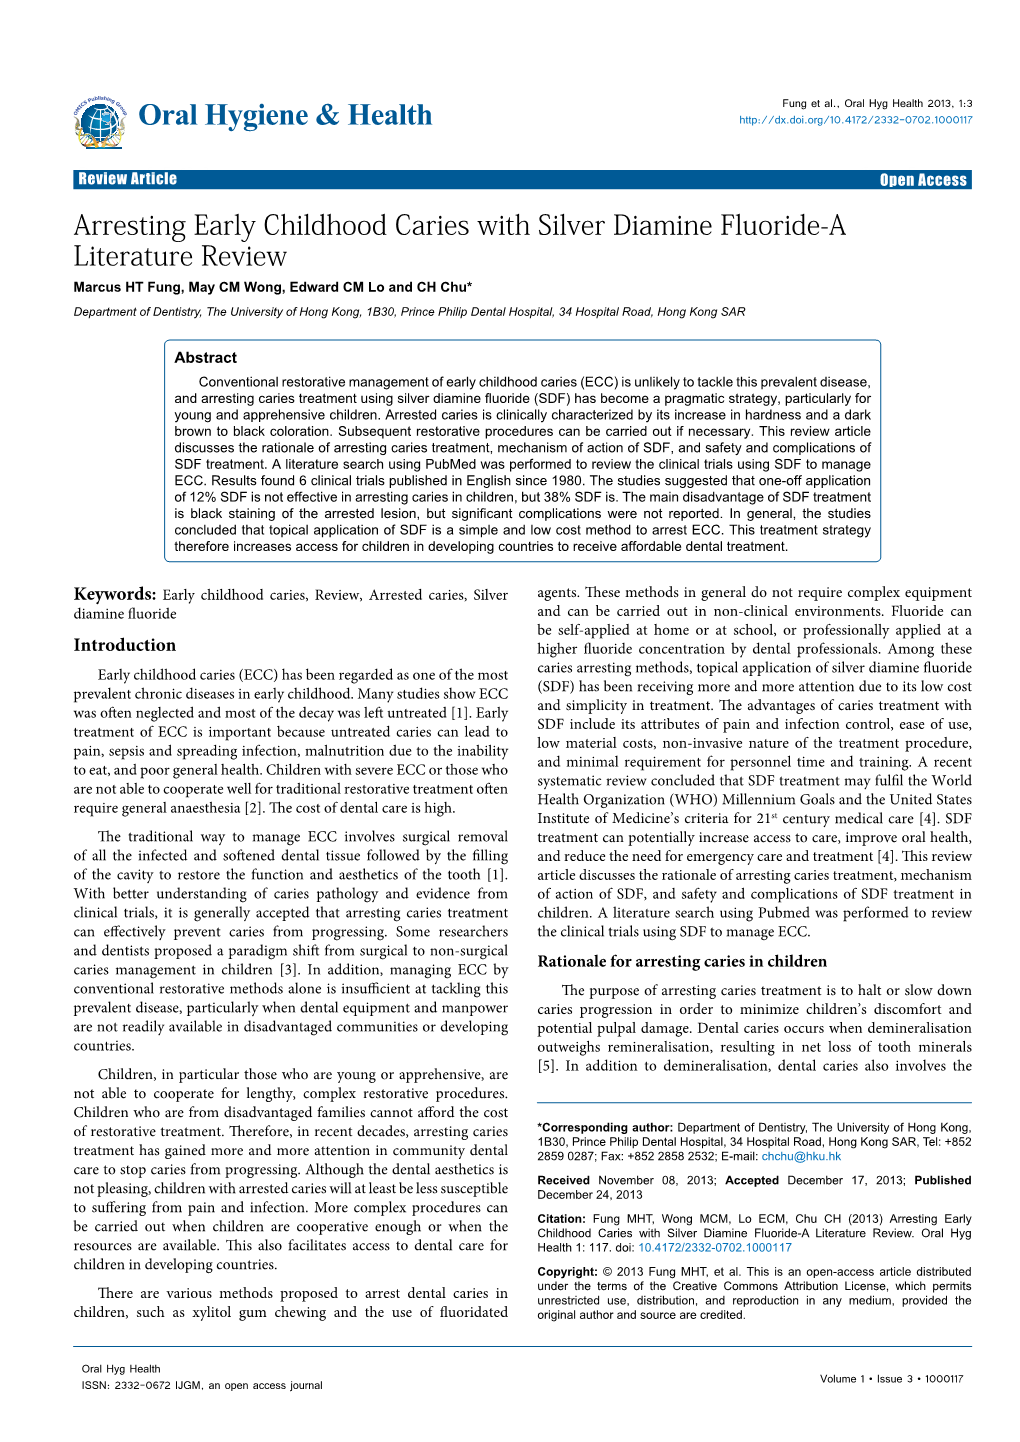 Arresting Early Childhood Caries with Silver Diamine Fluoride-A Literature Review